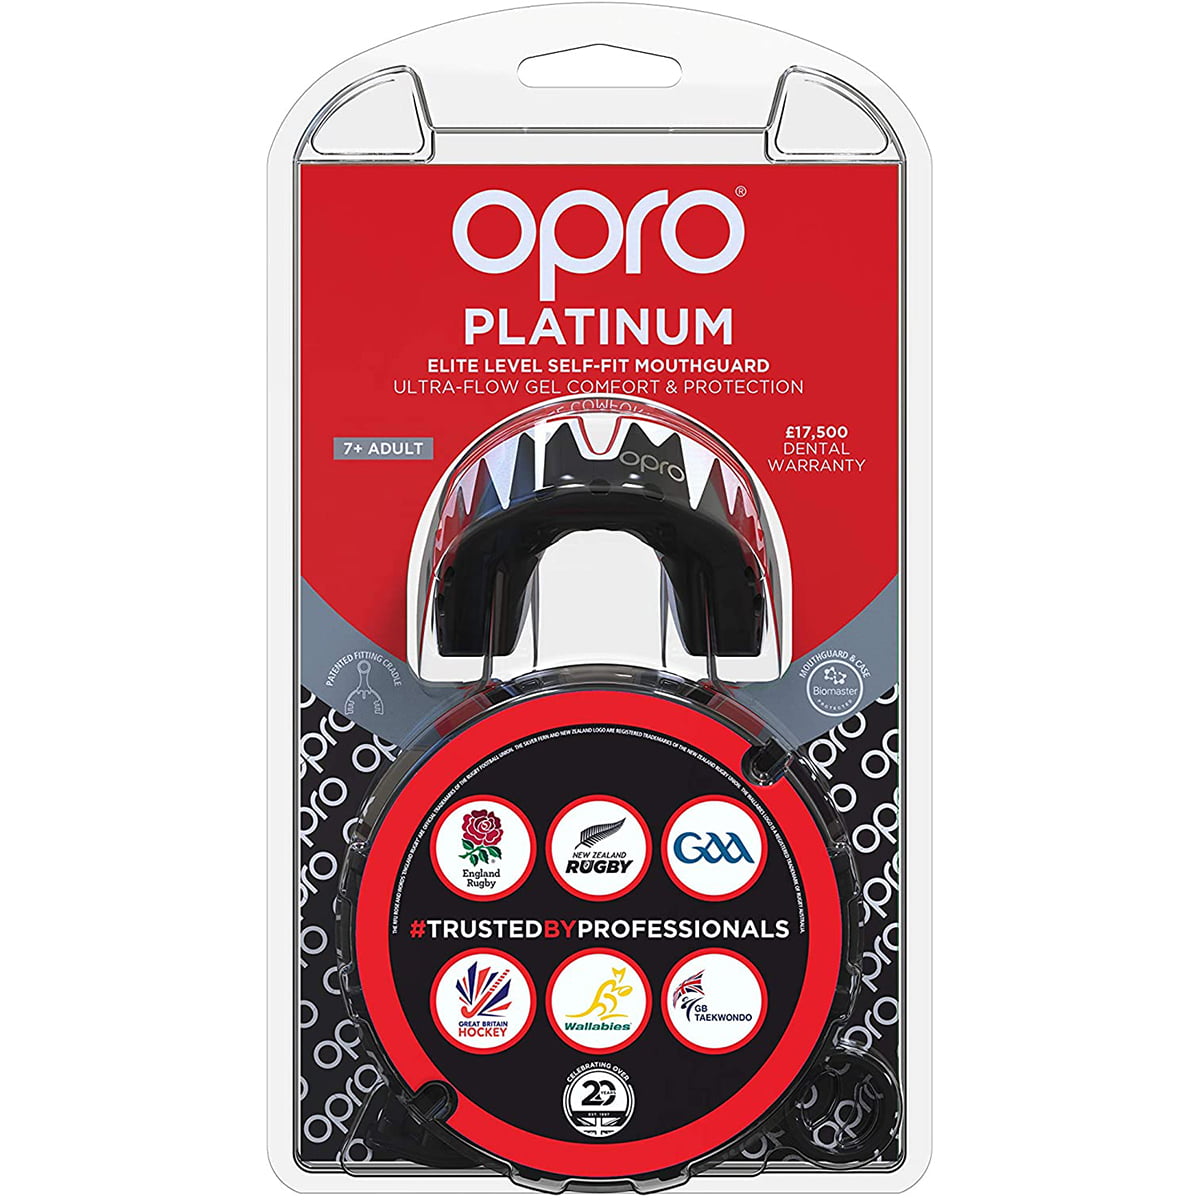 OPRO Adult Platinum Level Self-Fit Antimicrobial Mouthguard Black 